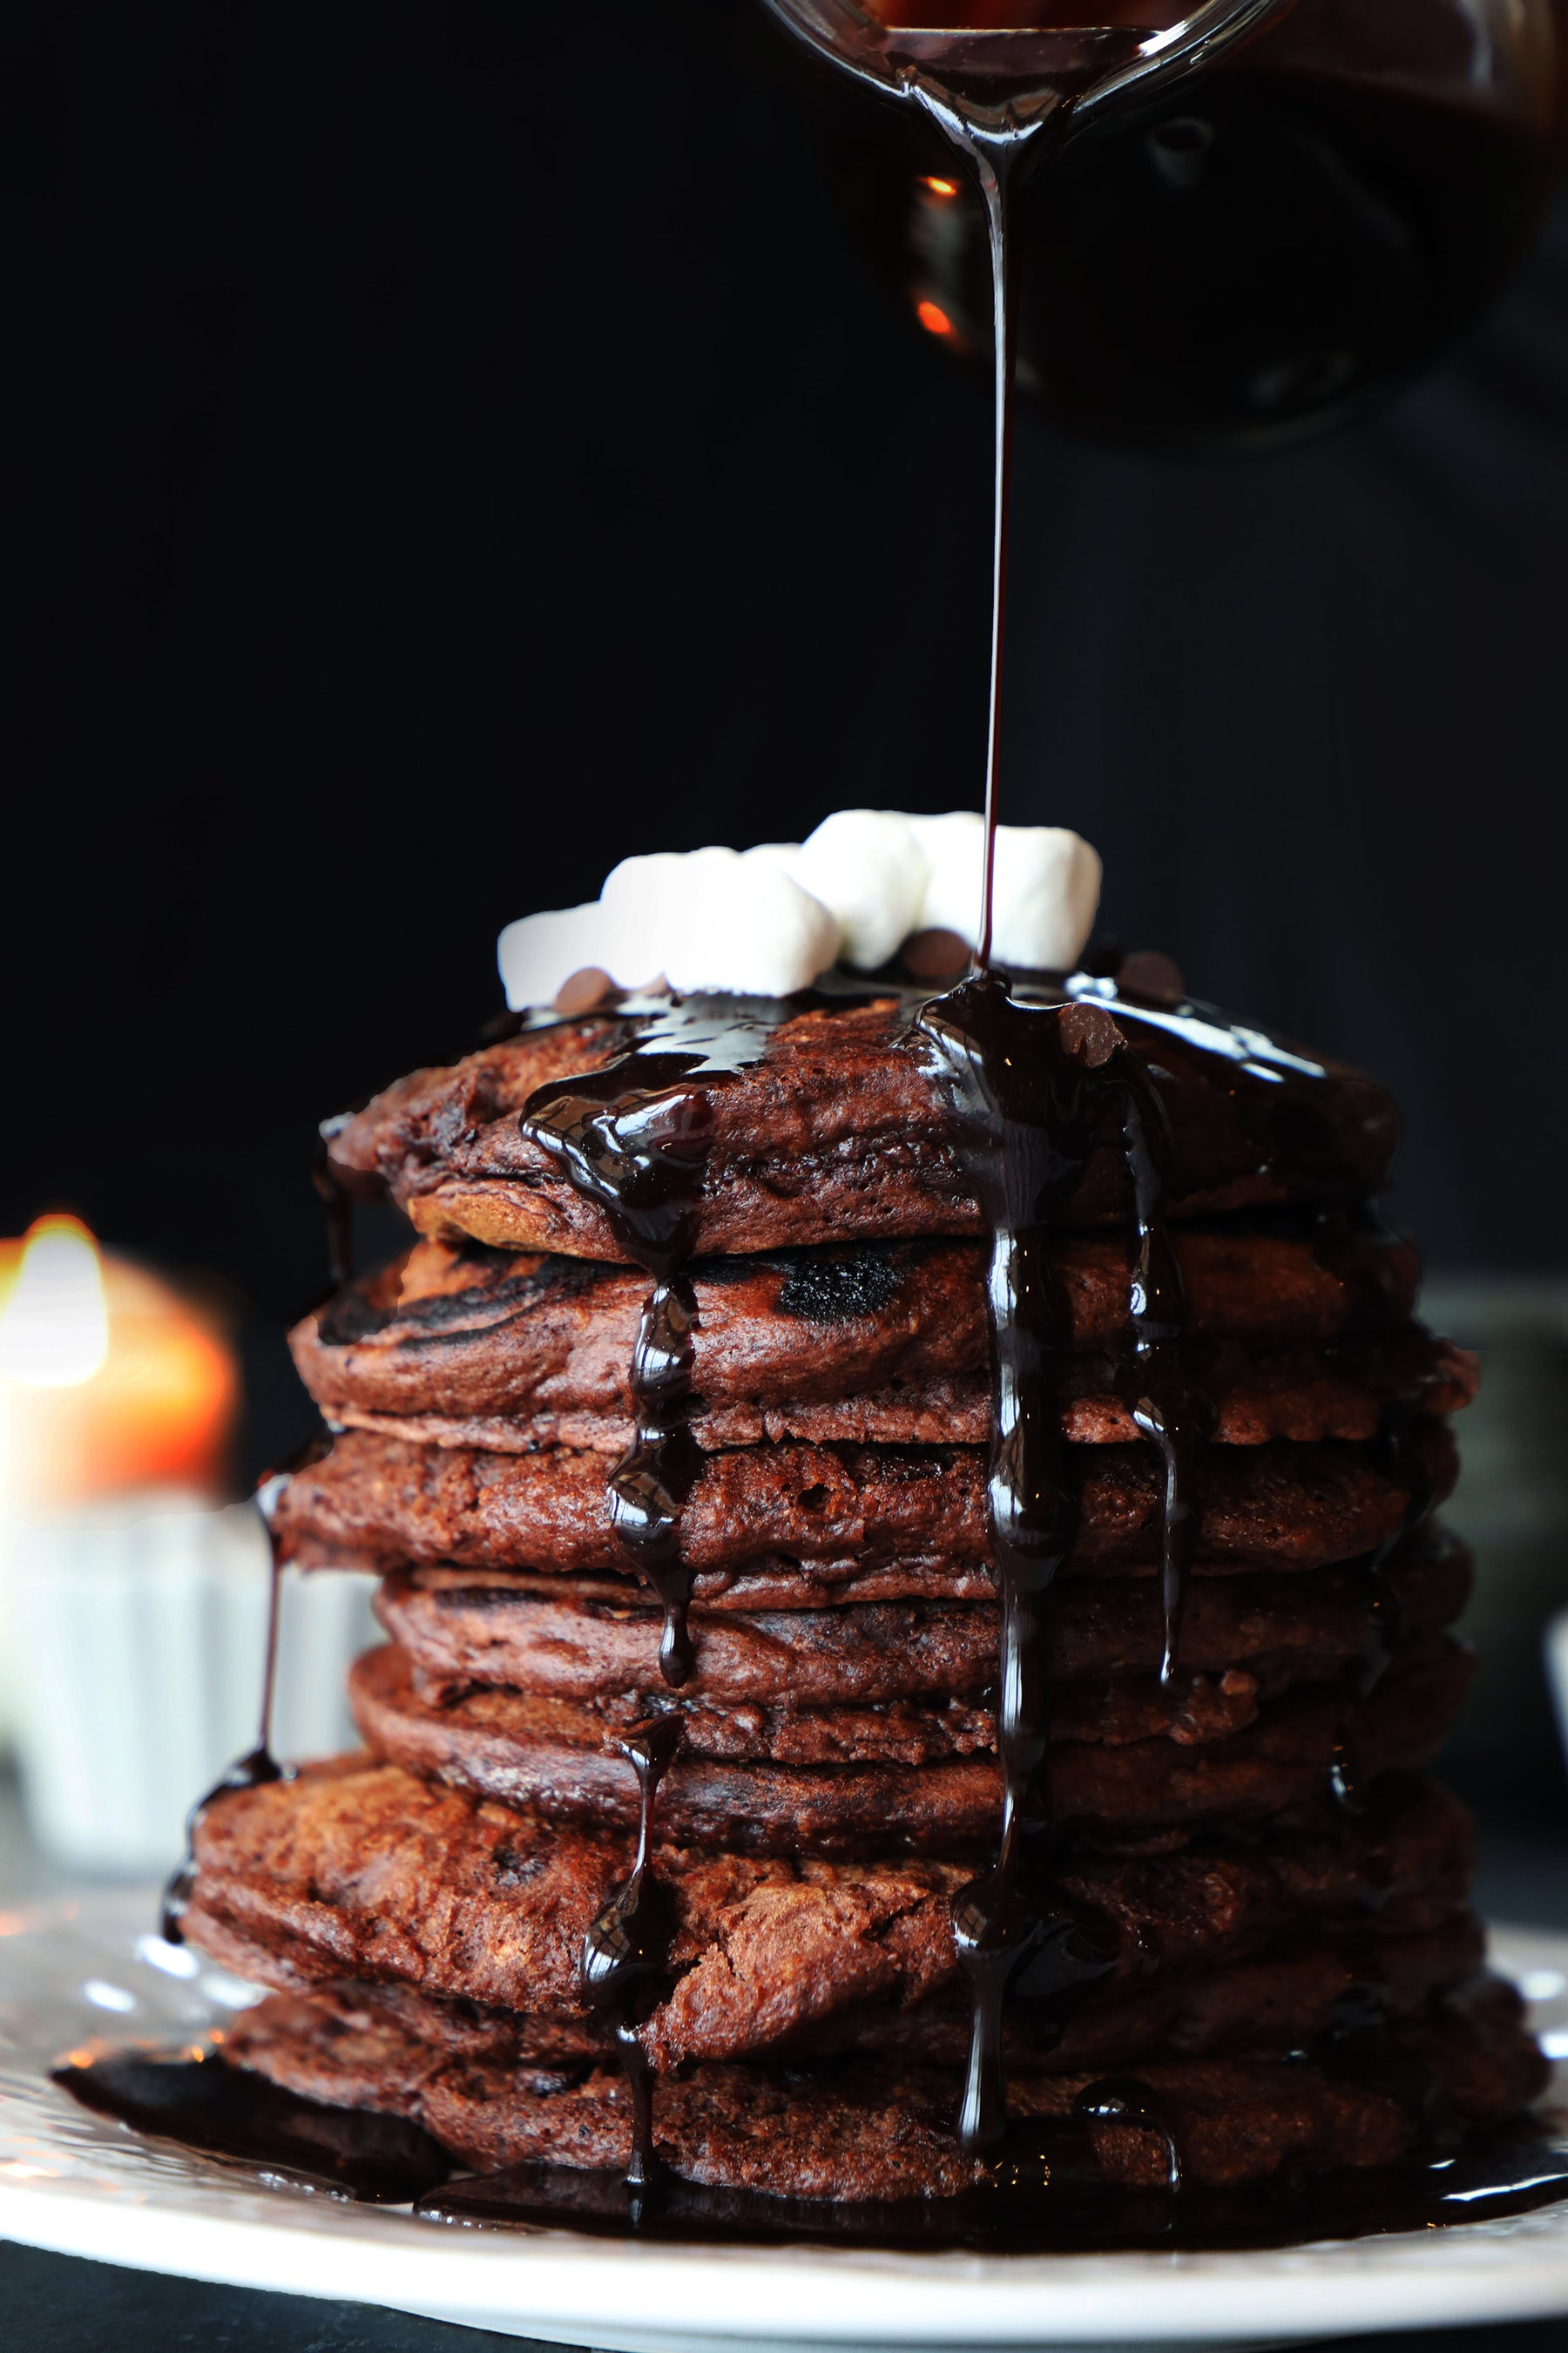 Double Chocolate Chip Pancakes